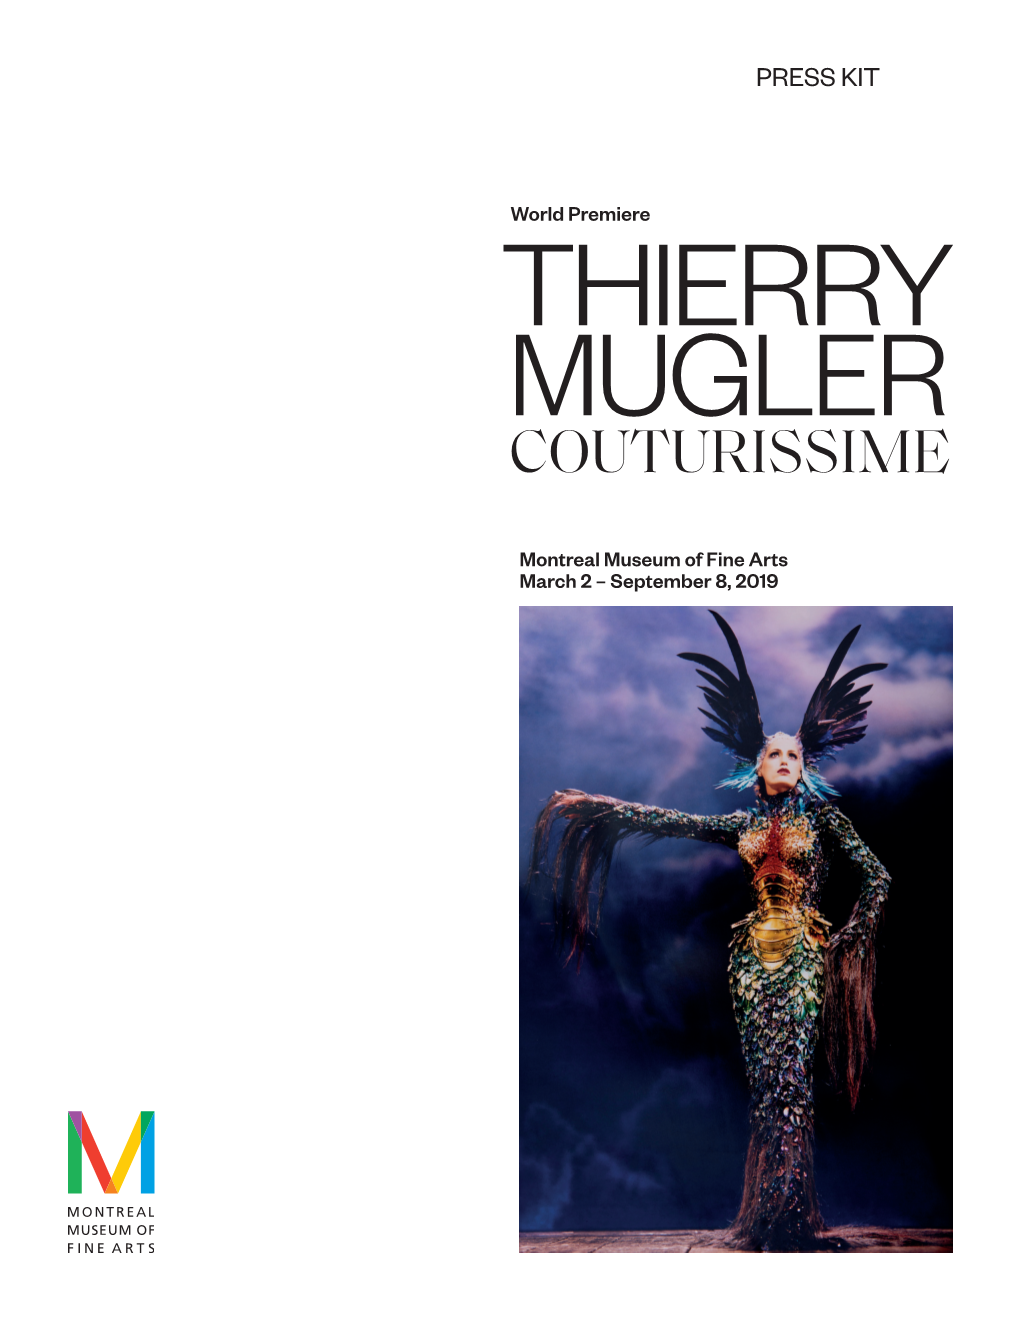 Thierry Mugler: Couturissime the First Exhibition Dedicated Tothierry Mugler Montreal Museum of Fine Arts March 2 – September 8, 2019